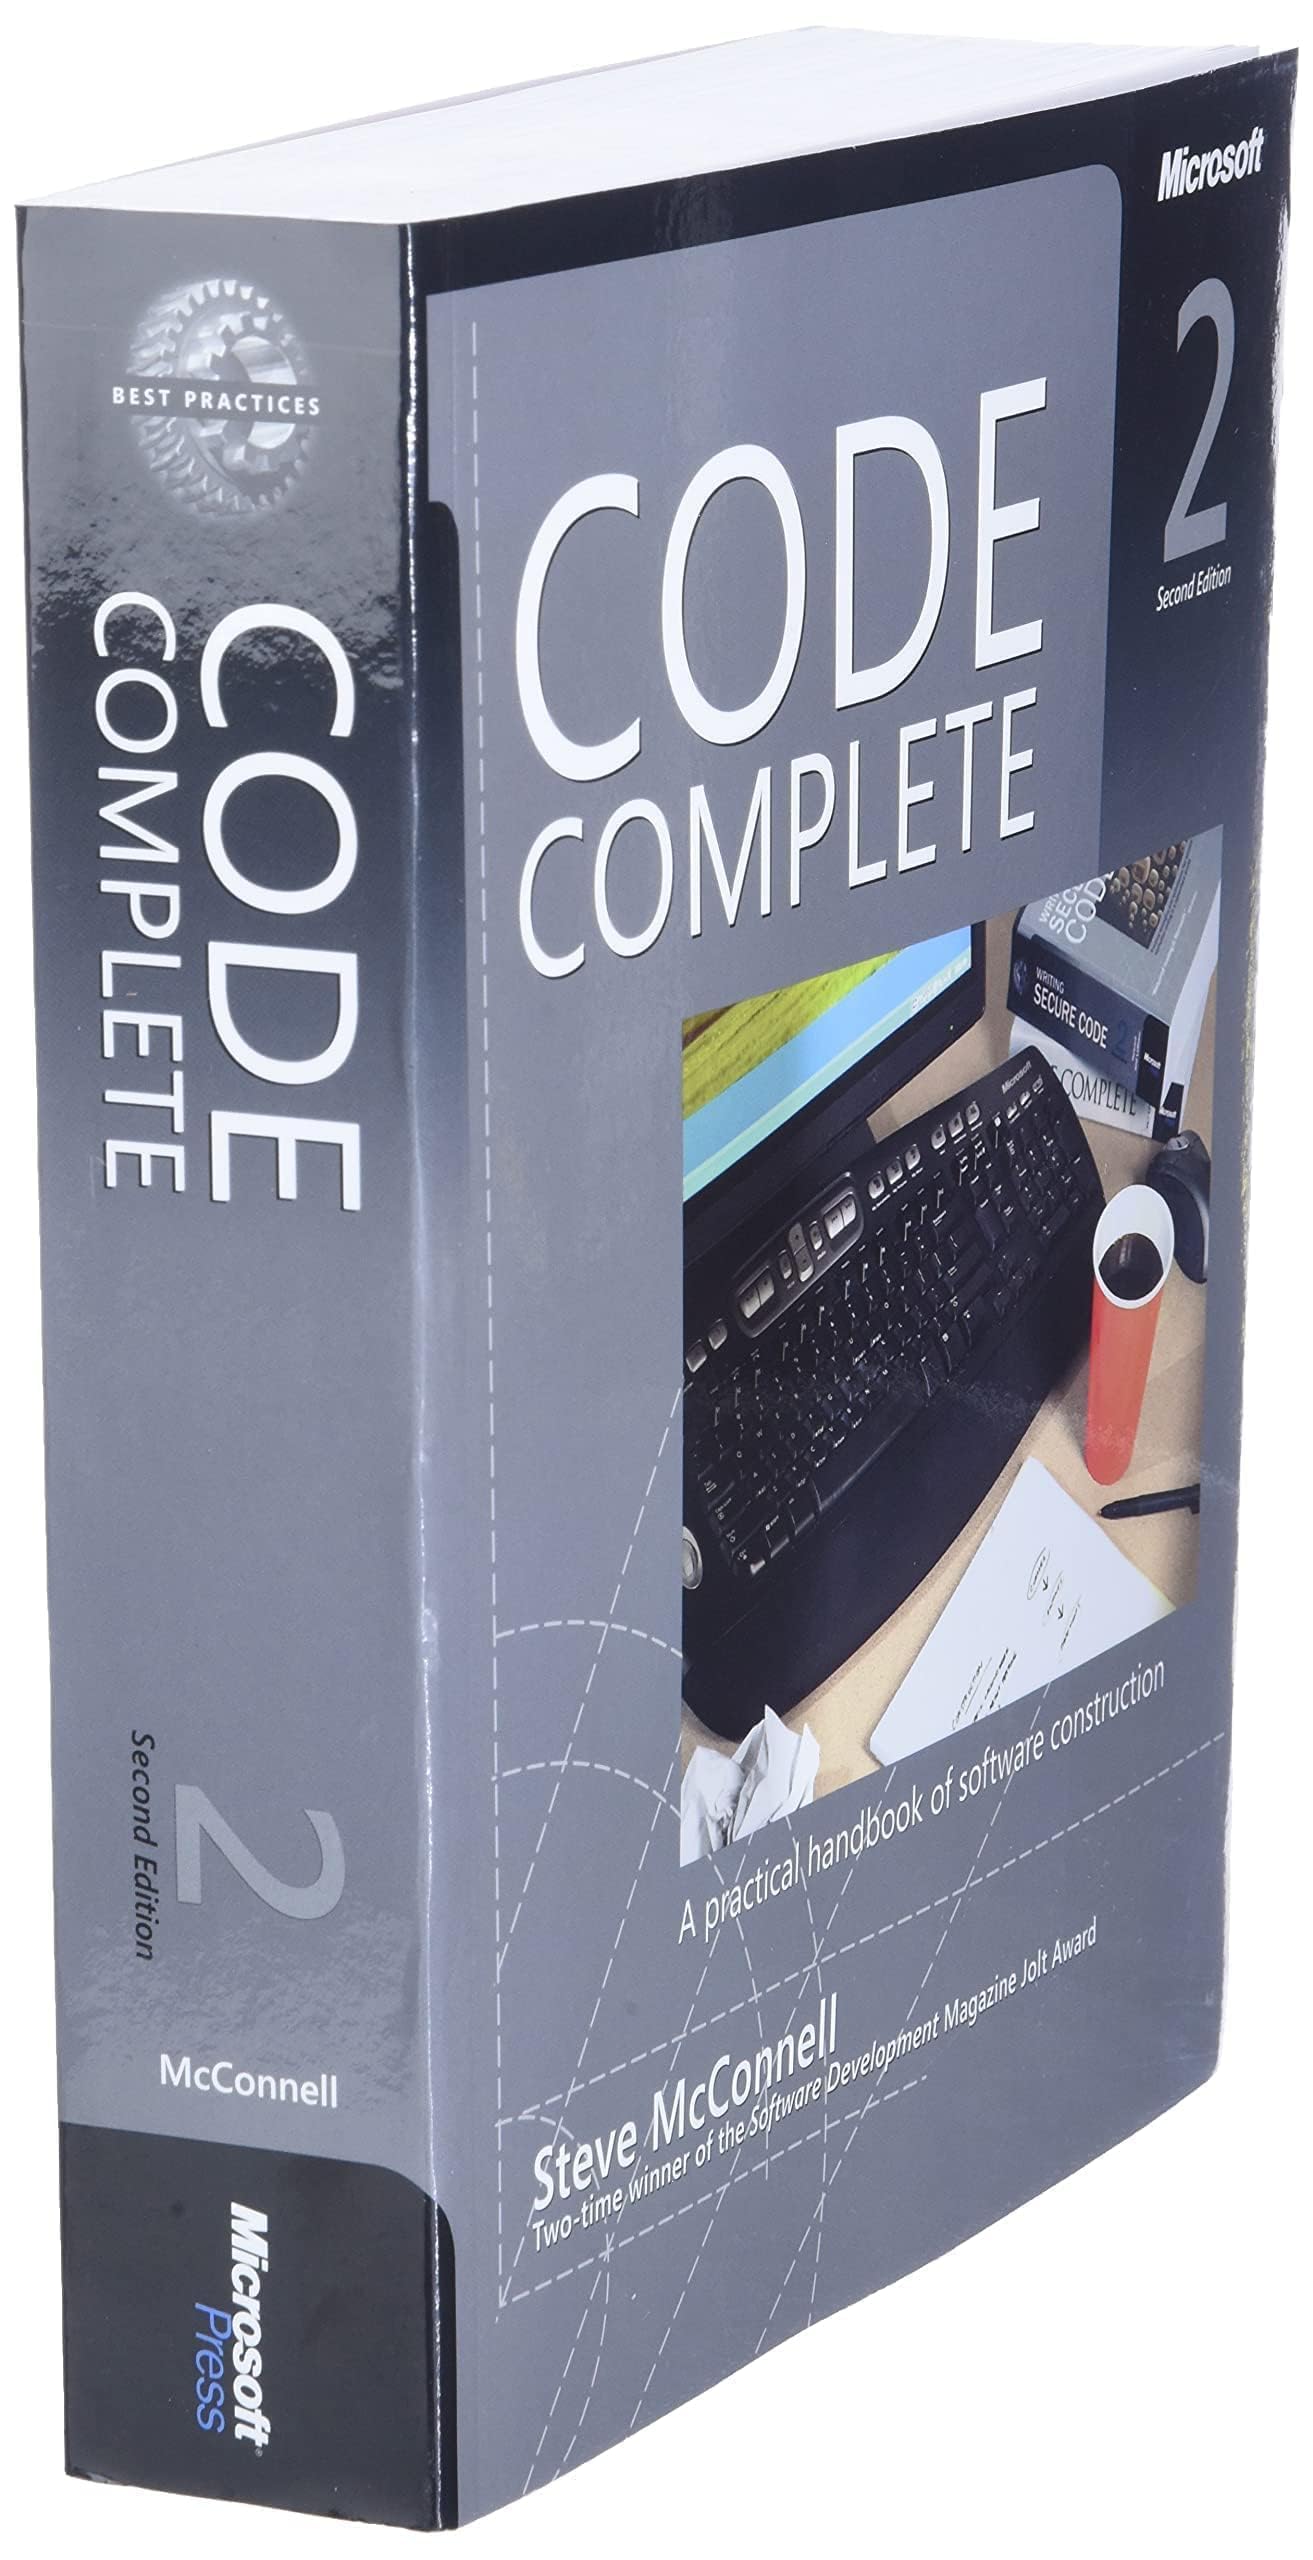 Code Complete: A Practical Handbook of Software Construction, Second Edition